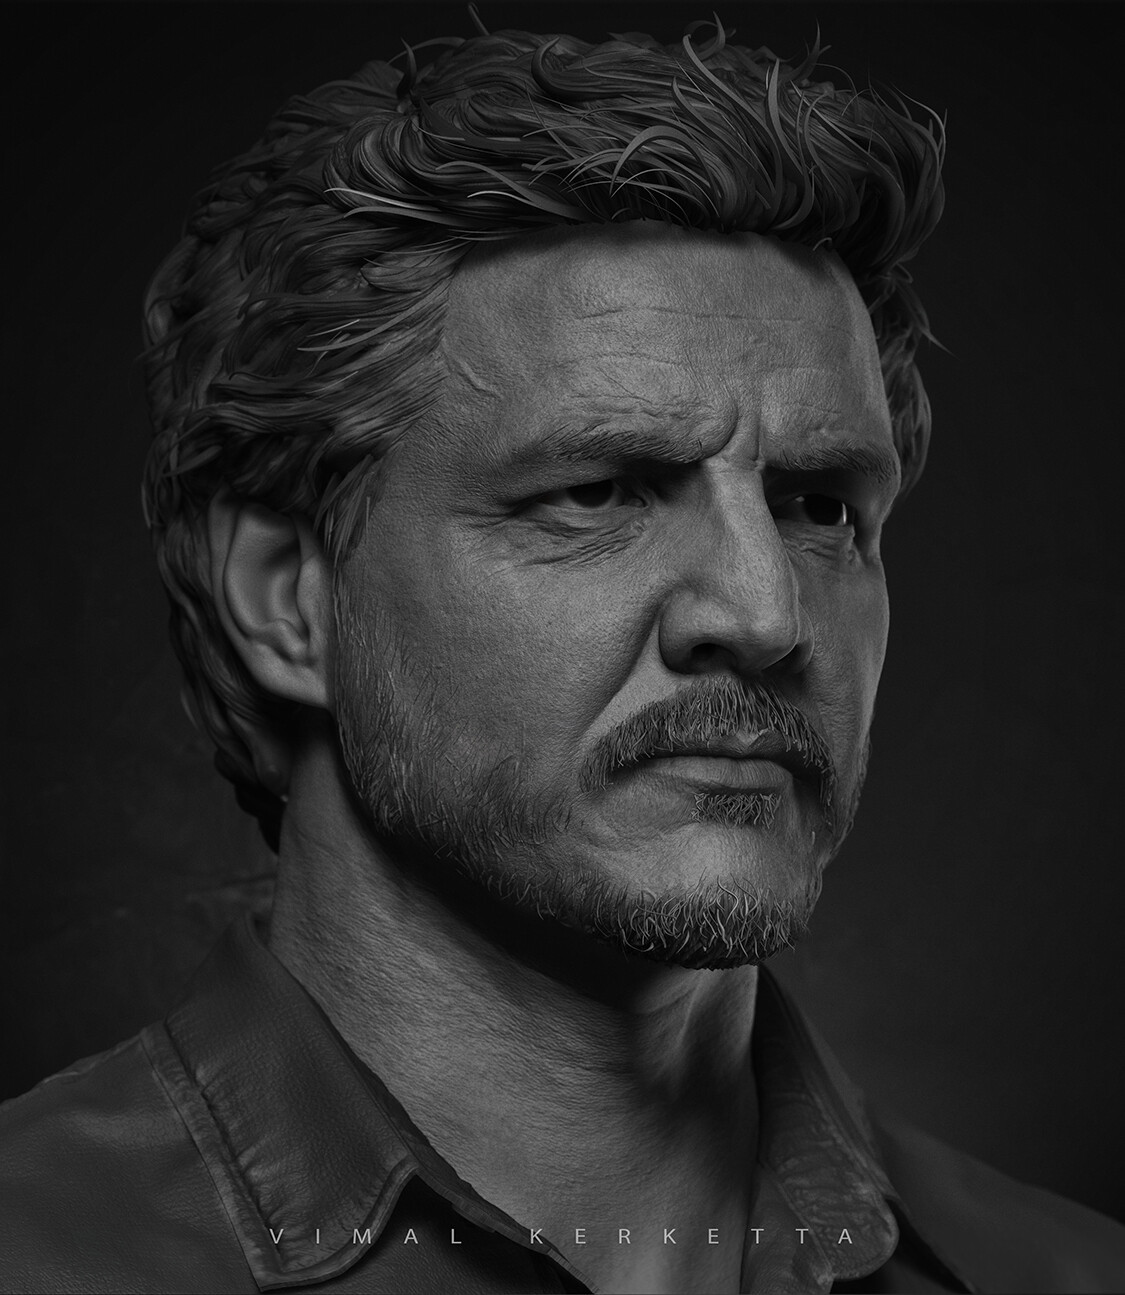 Pedro Pascal as The Last of Us' Joel Sculpted in 3D